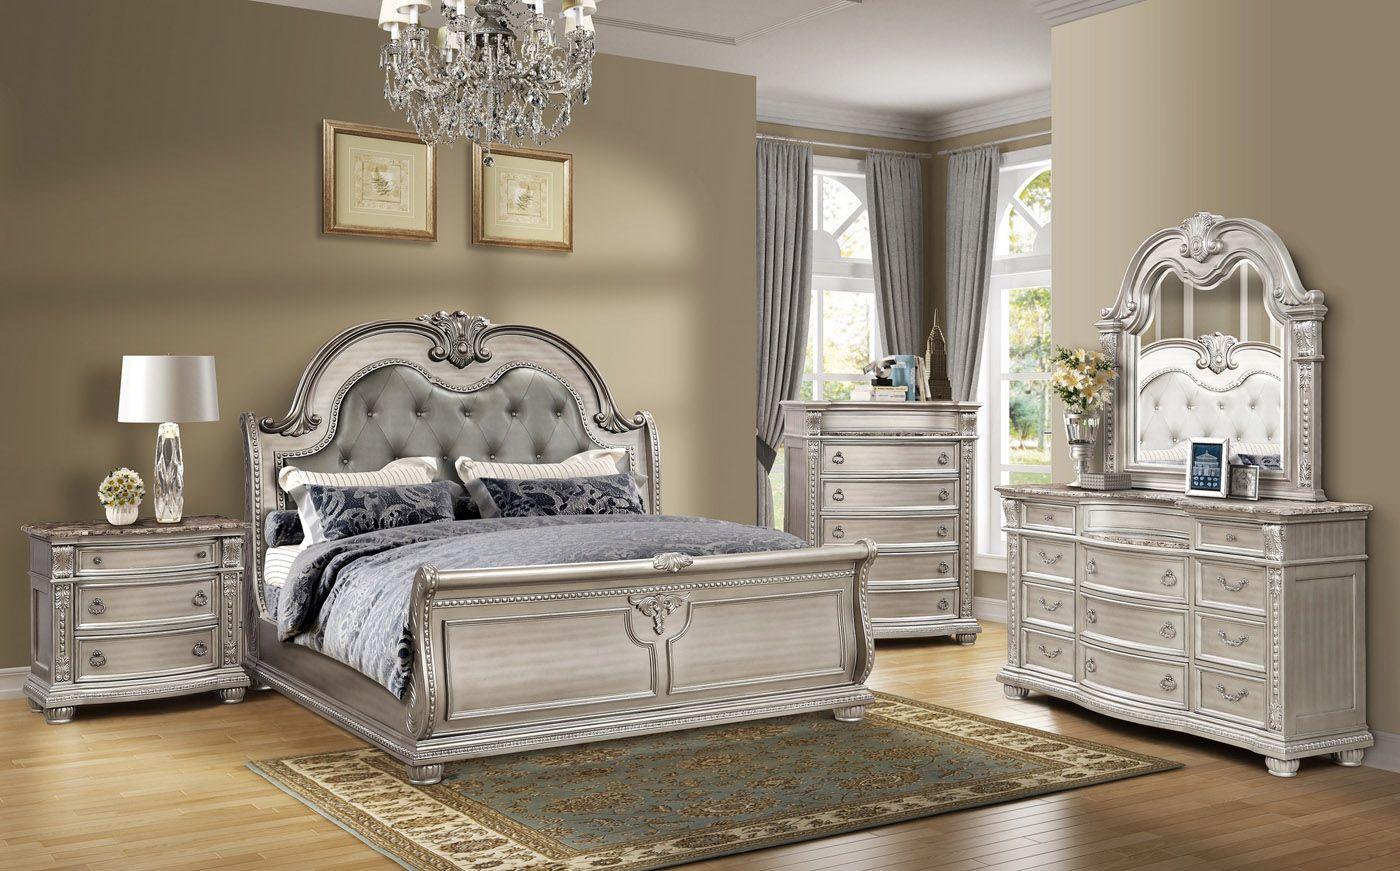 Classic, Traditional Sleigh Bedroom Set B9506 B9506-CK-NDM-4PC in Platinum Bonded Leather